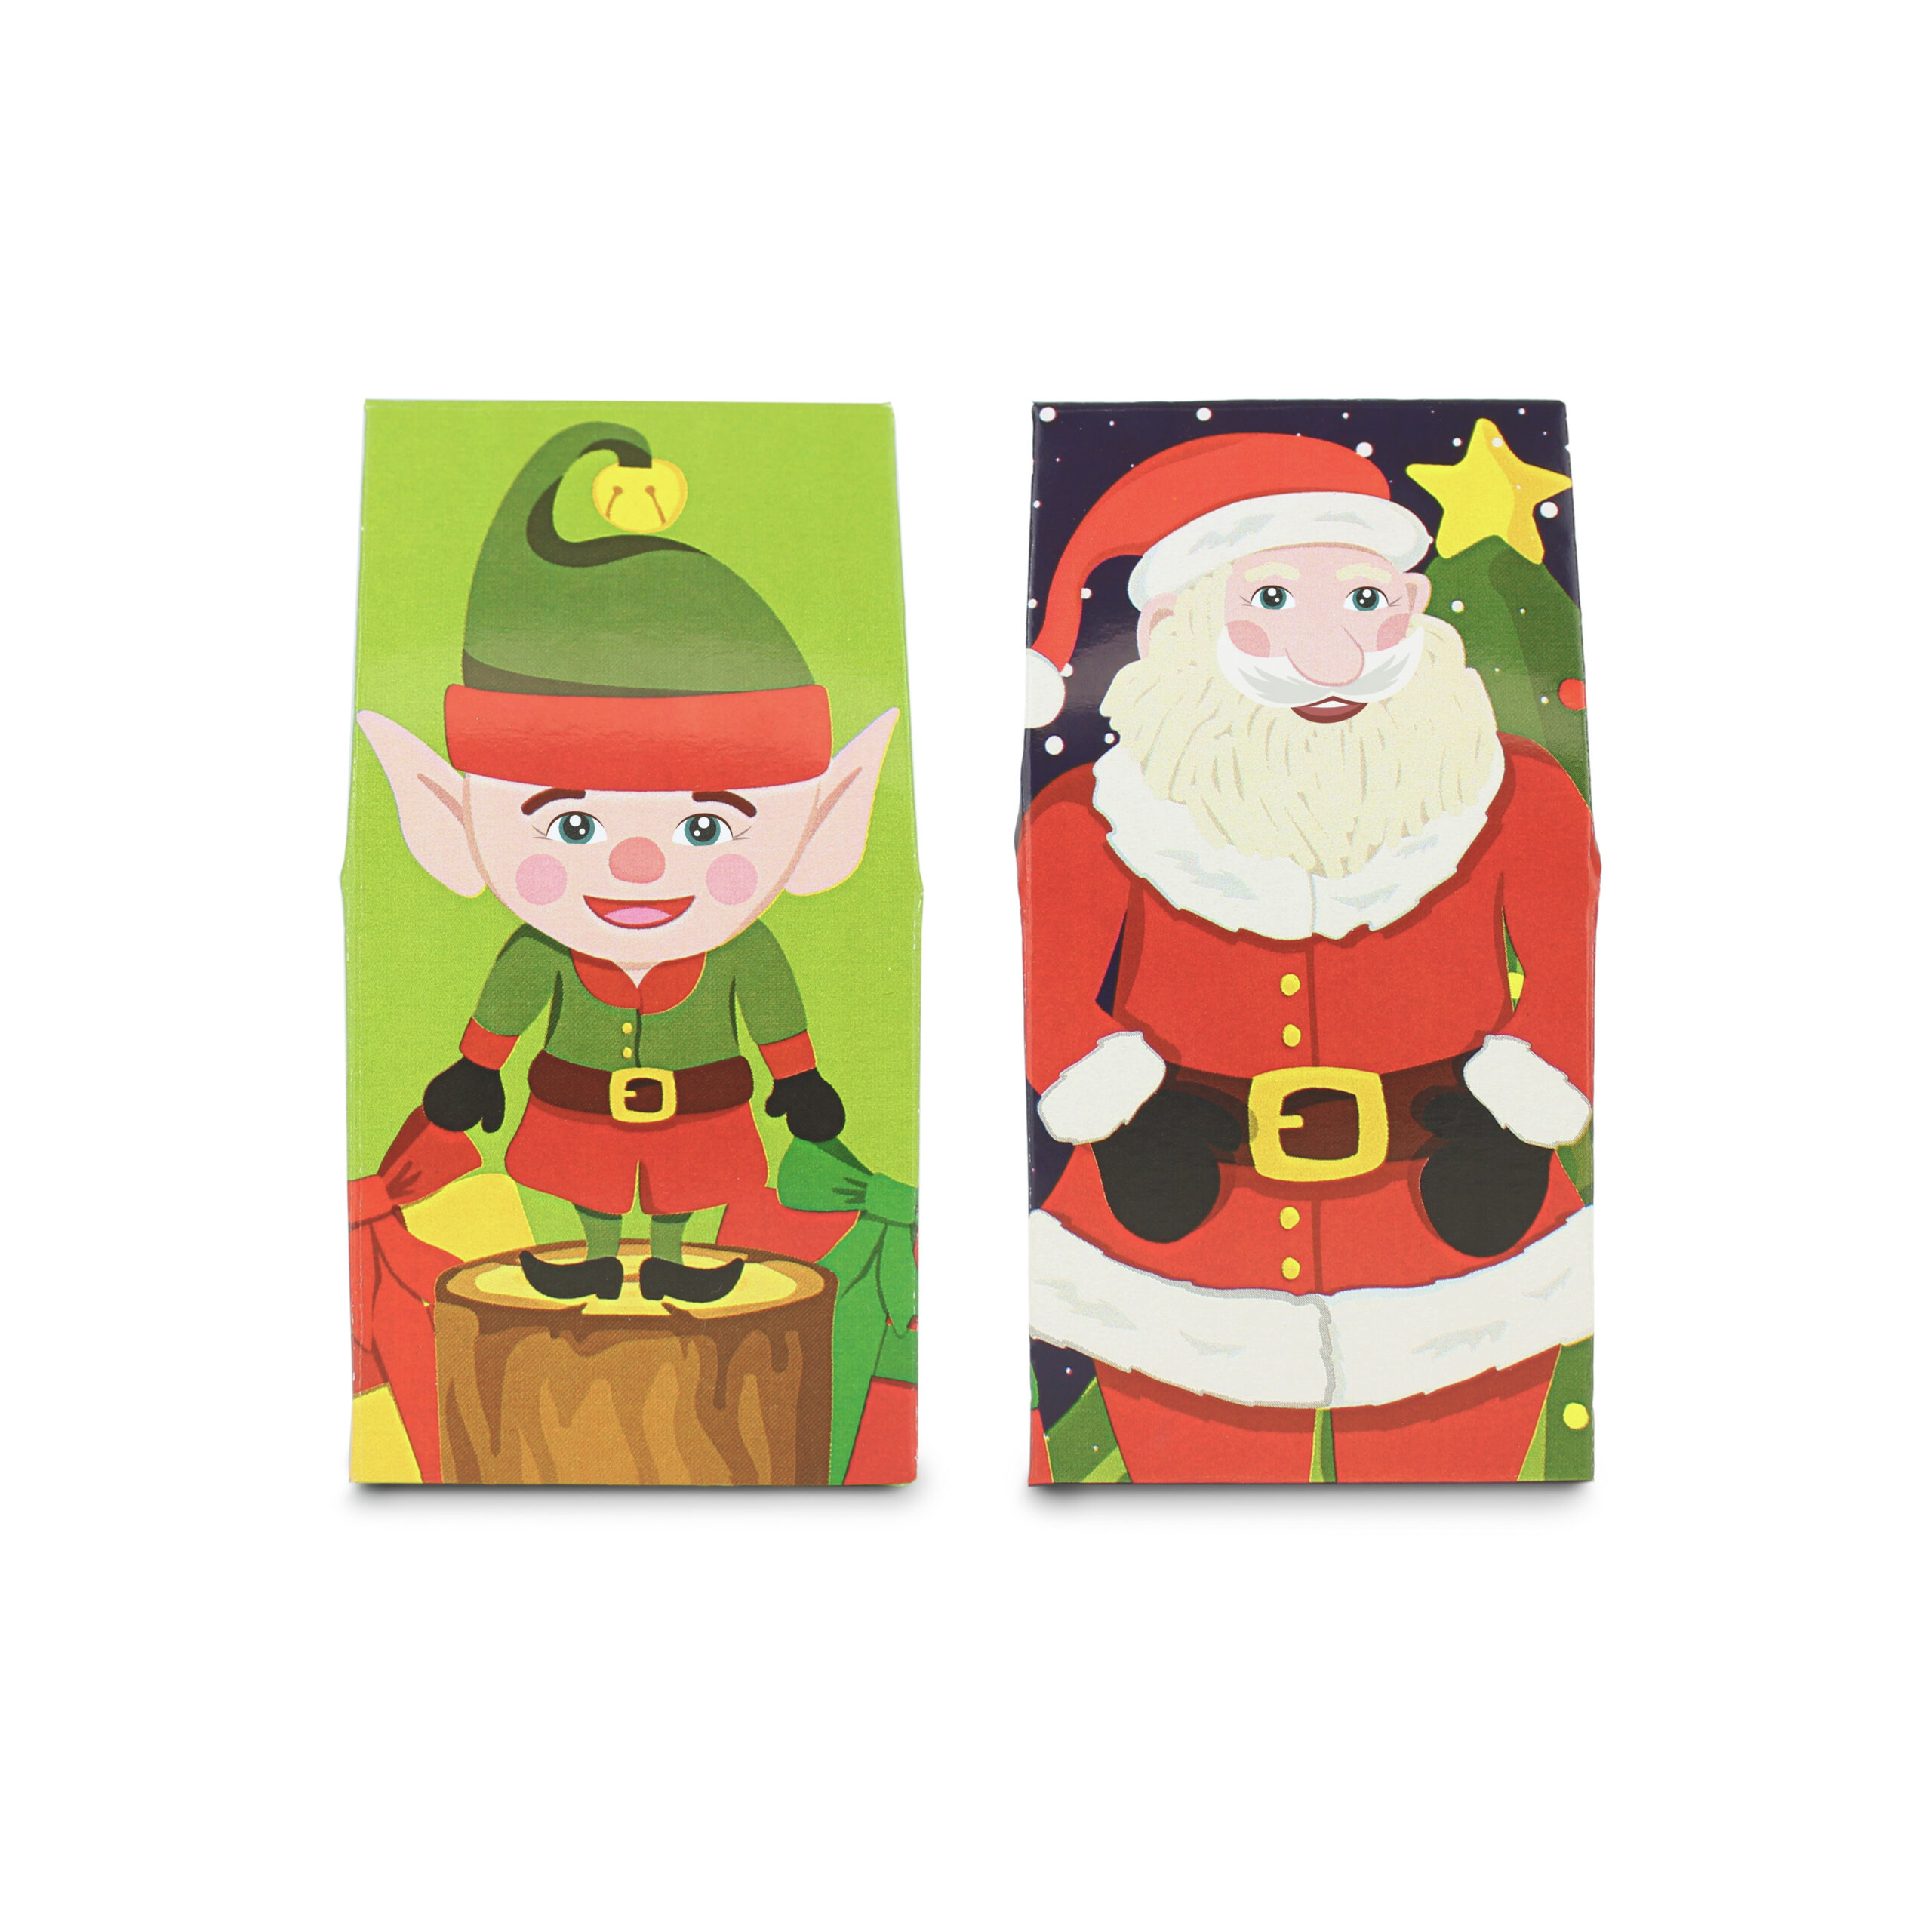 Hand illustrated festive Santa & Elf Mini A-frame Carton perfect for holding 50g bagged sweets, chocolates and treats. Perfect for Christmas gifting